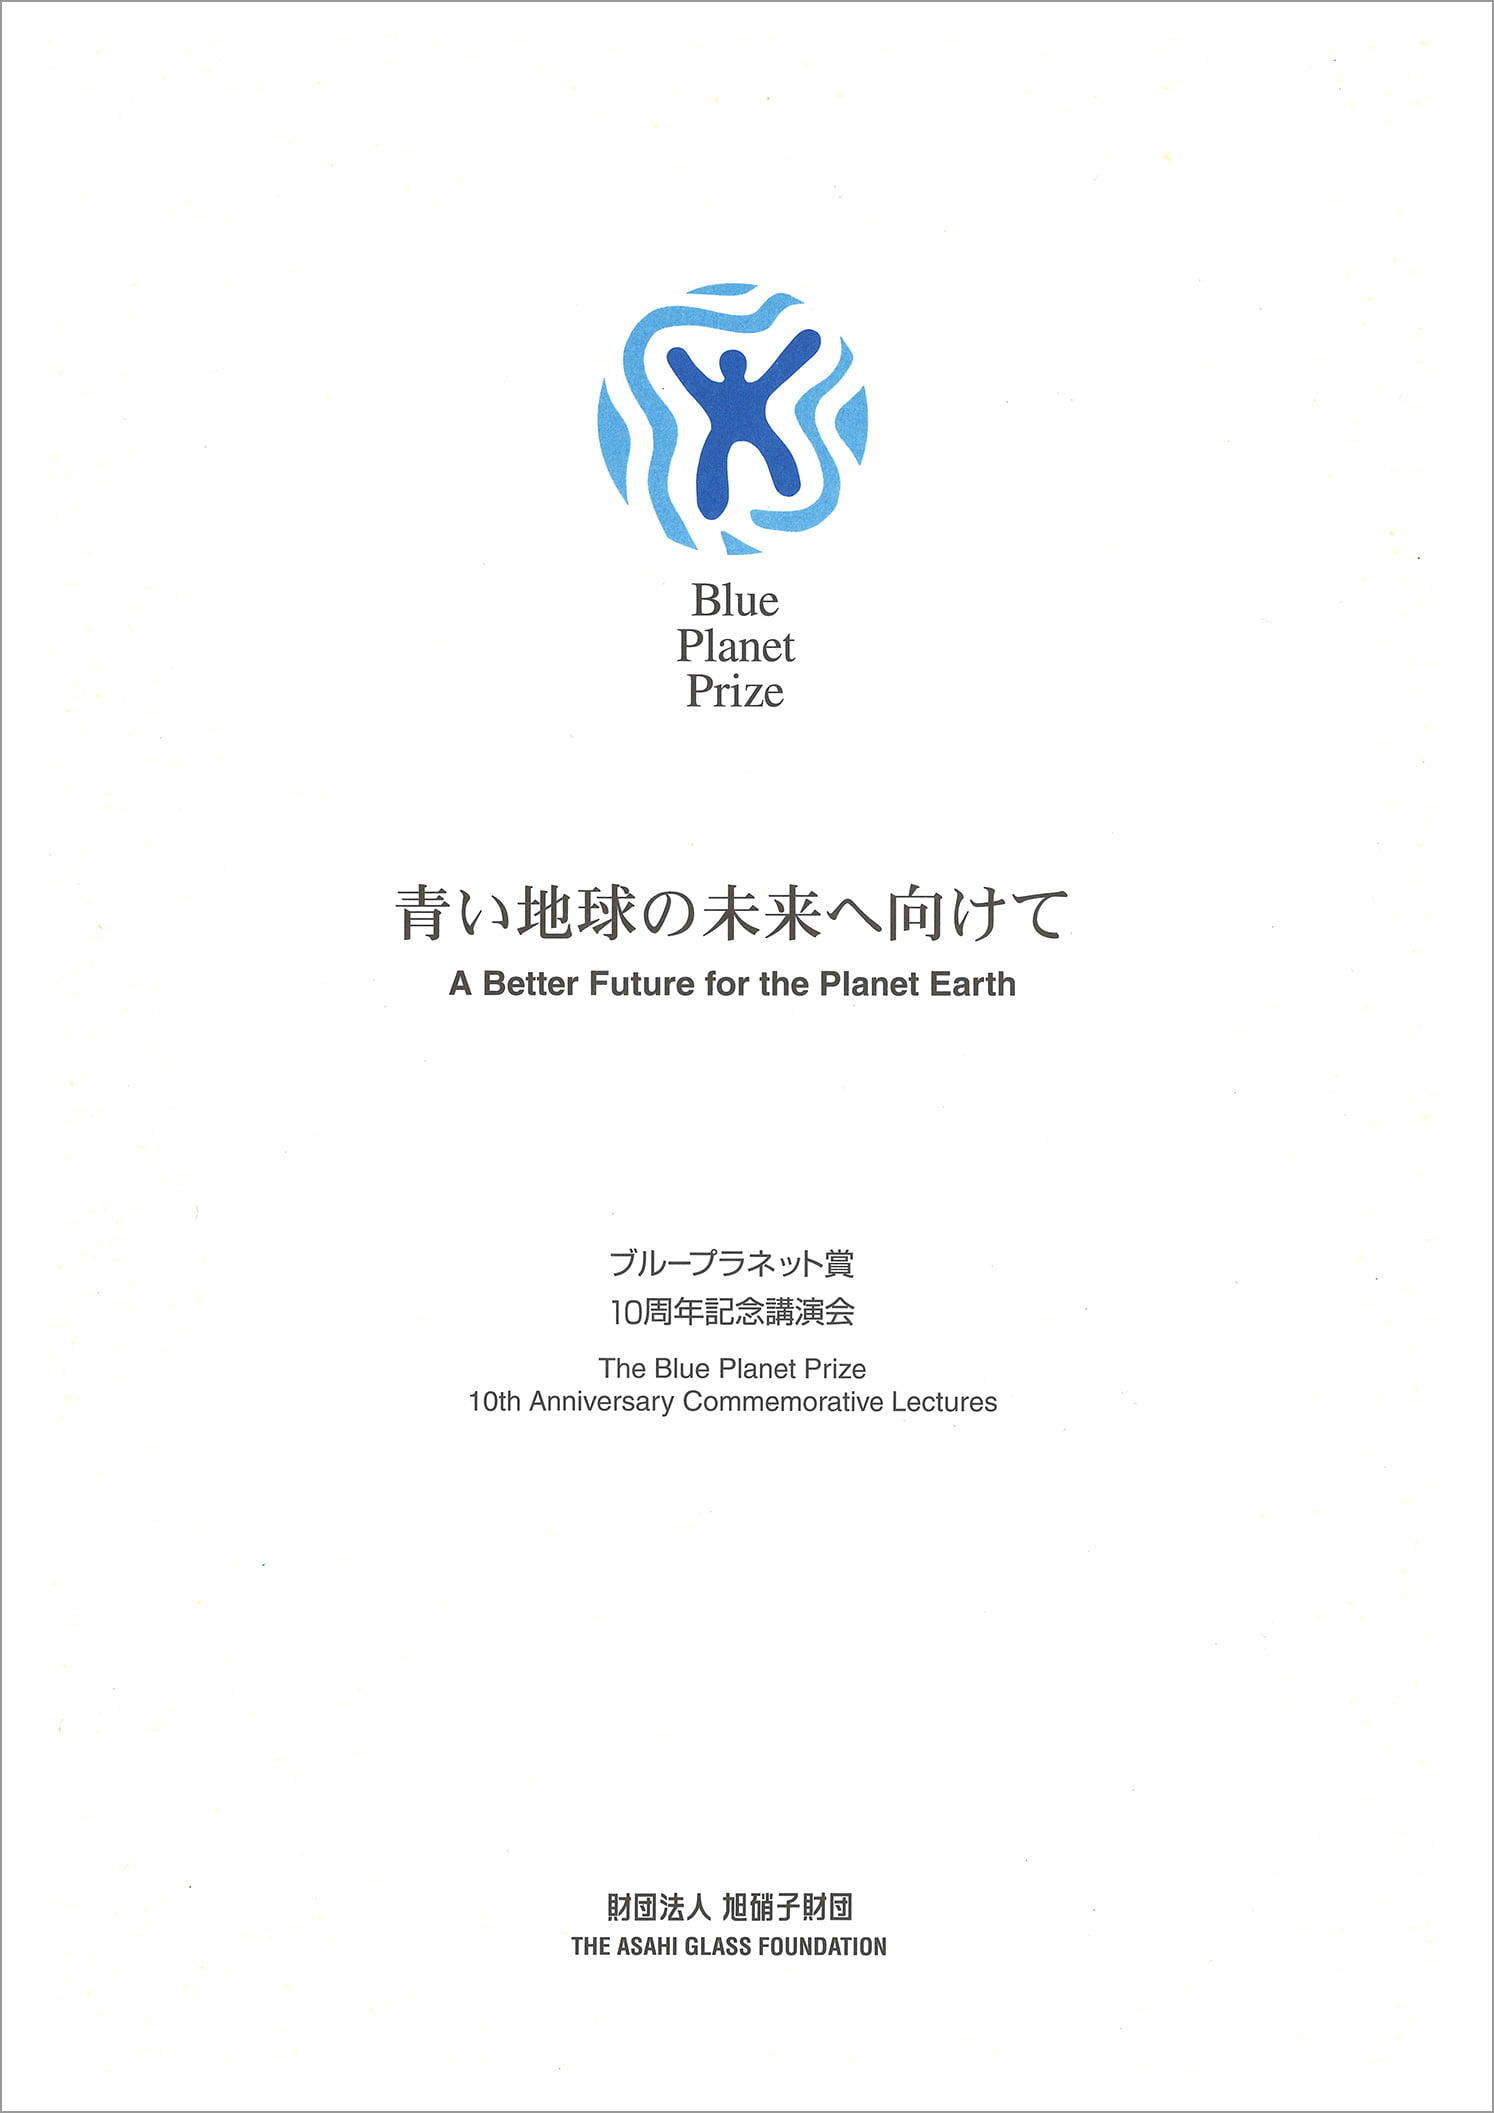 Collected Drafts of Blue Planet Prize Commemorative Lectures